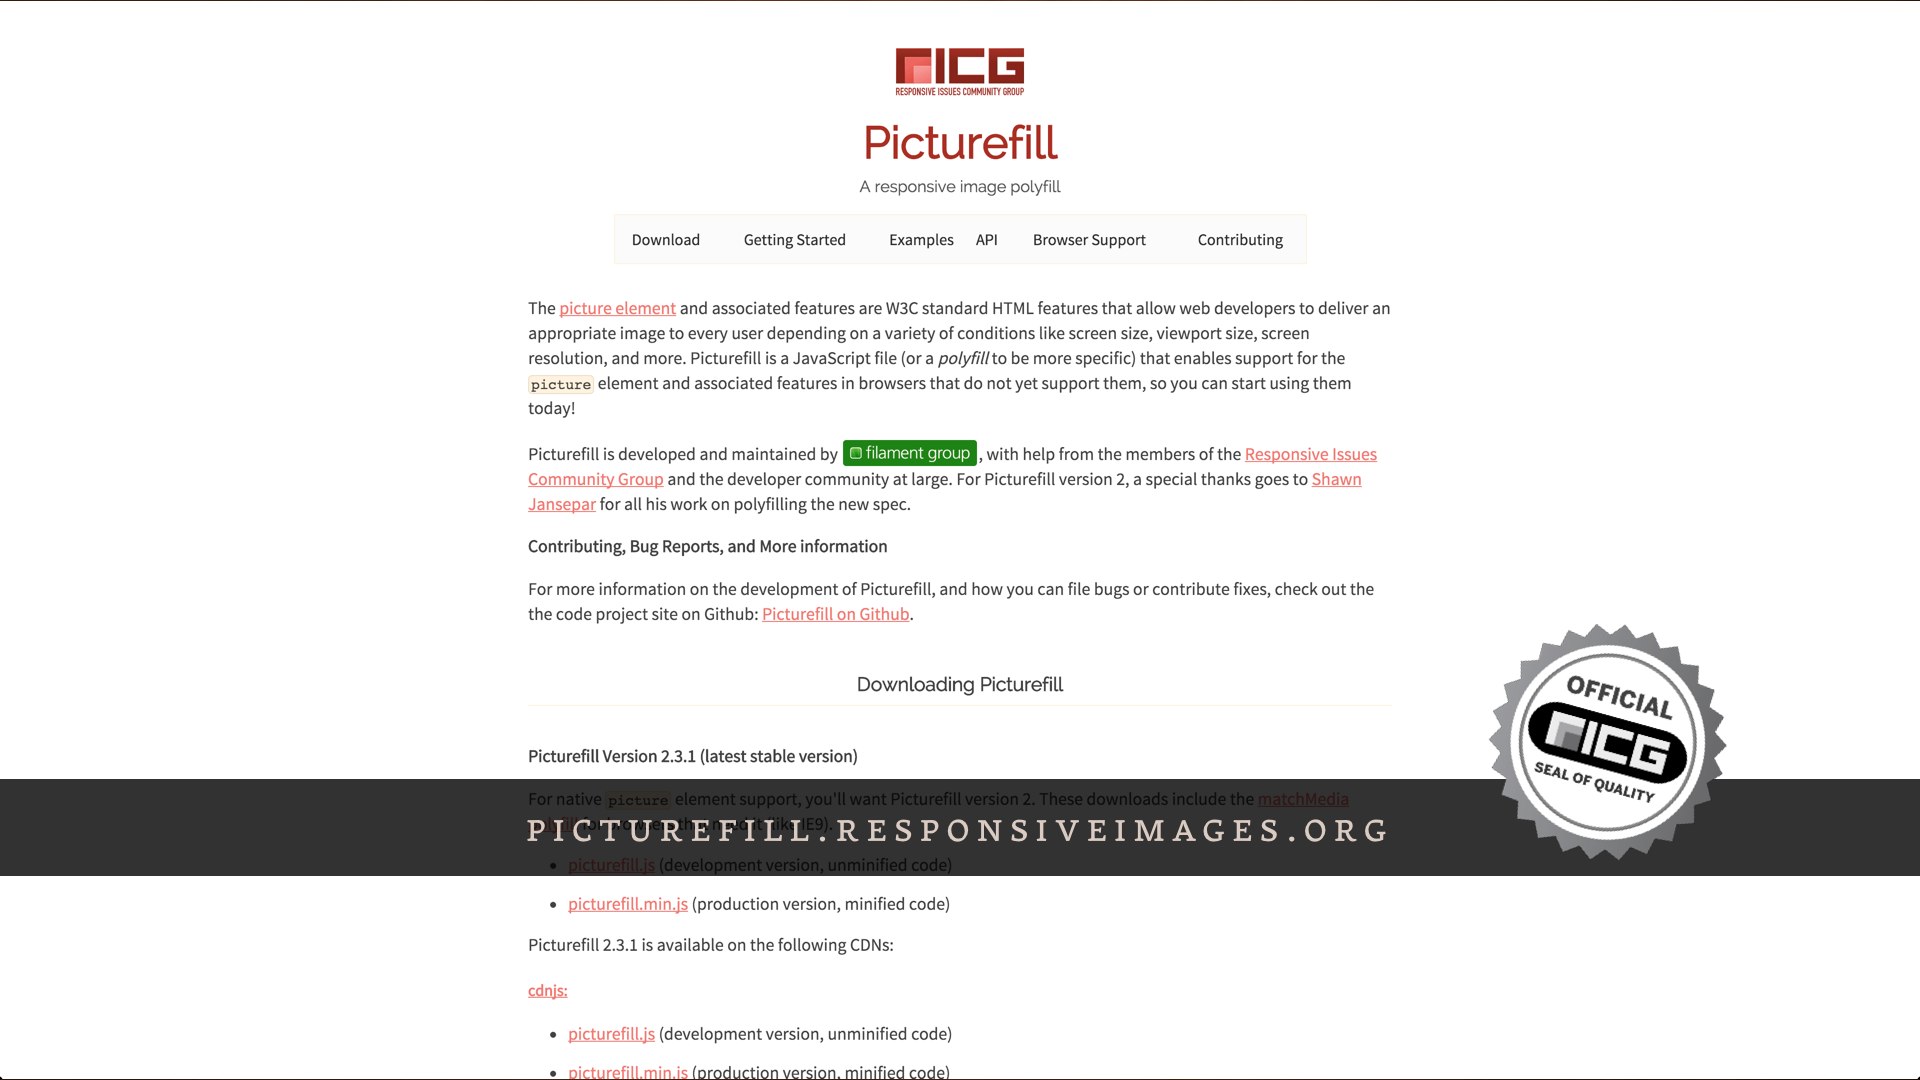 Screenshot of the Picturefill project homepage